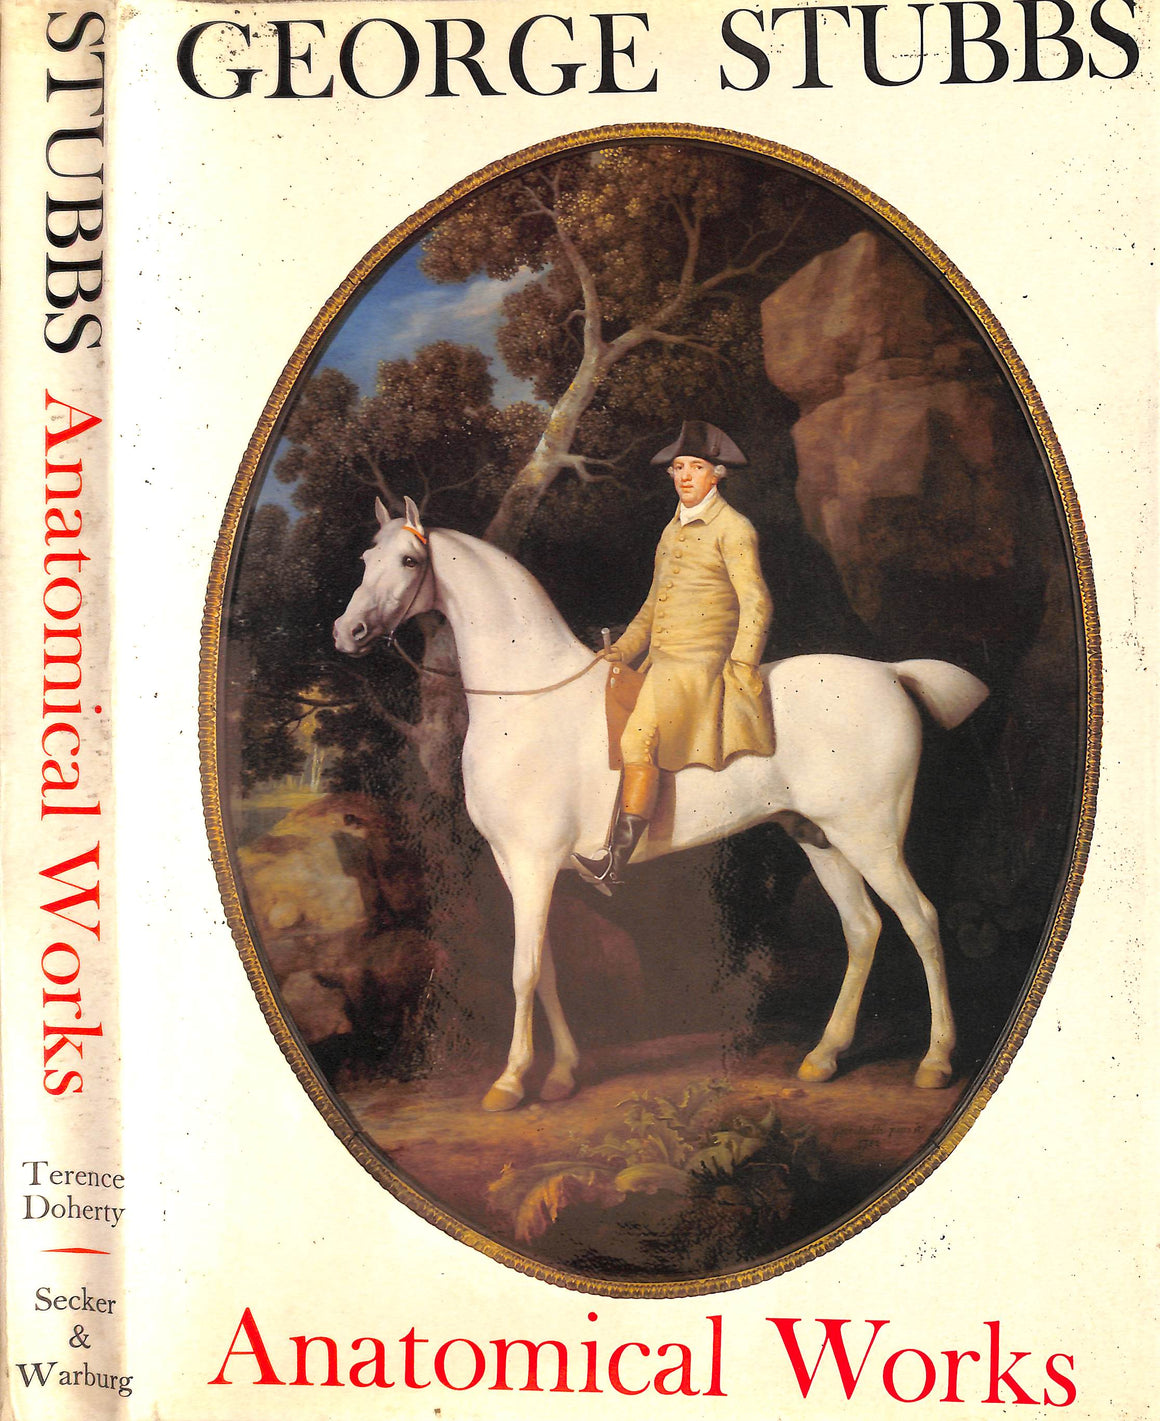 "George Stubbs: Anatomical Works" 1974 DOHERTY, Terence